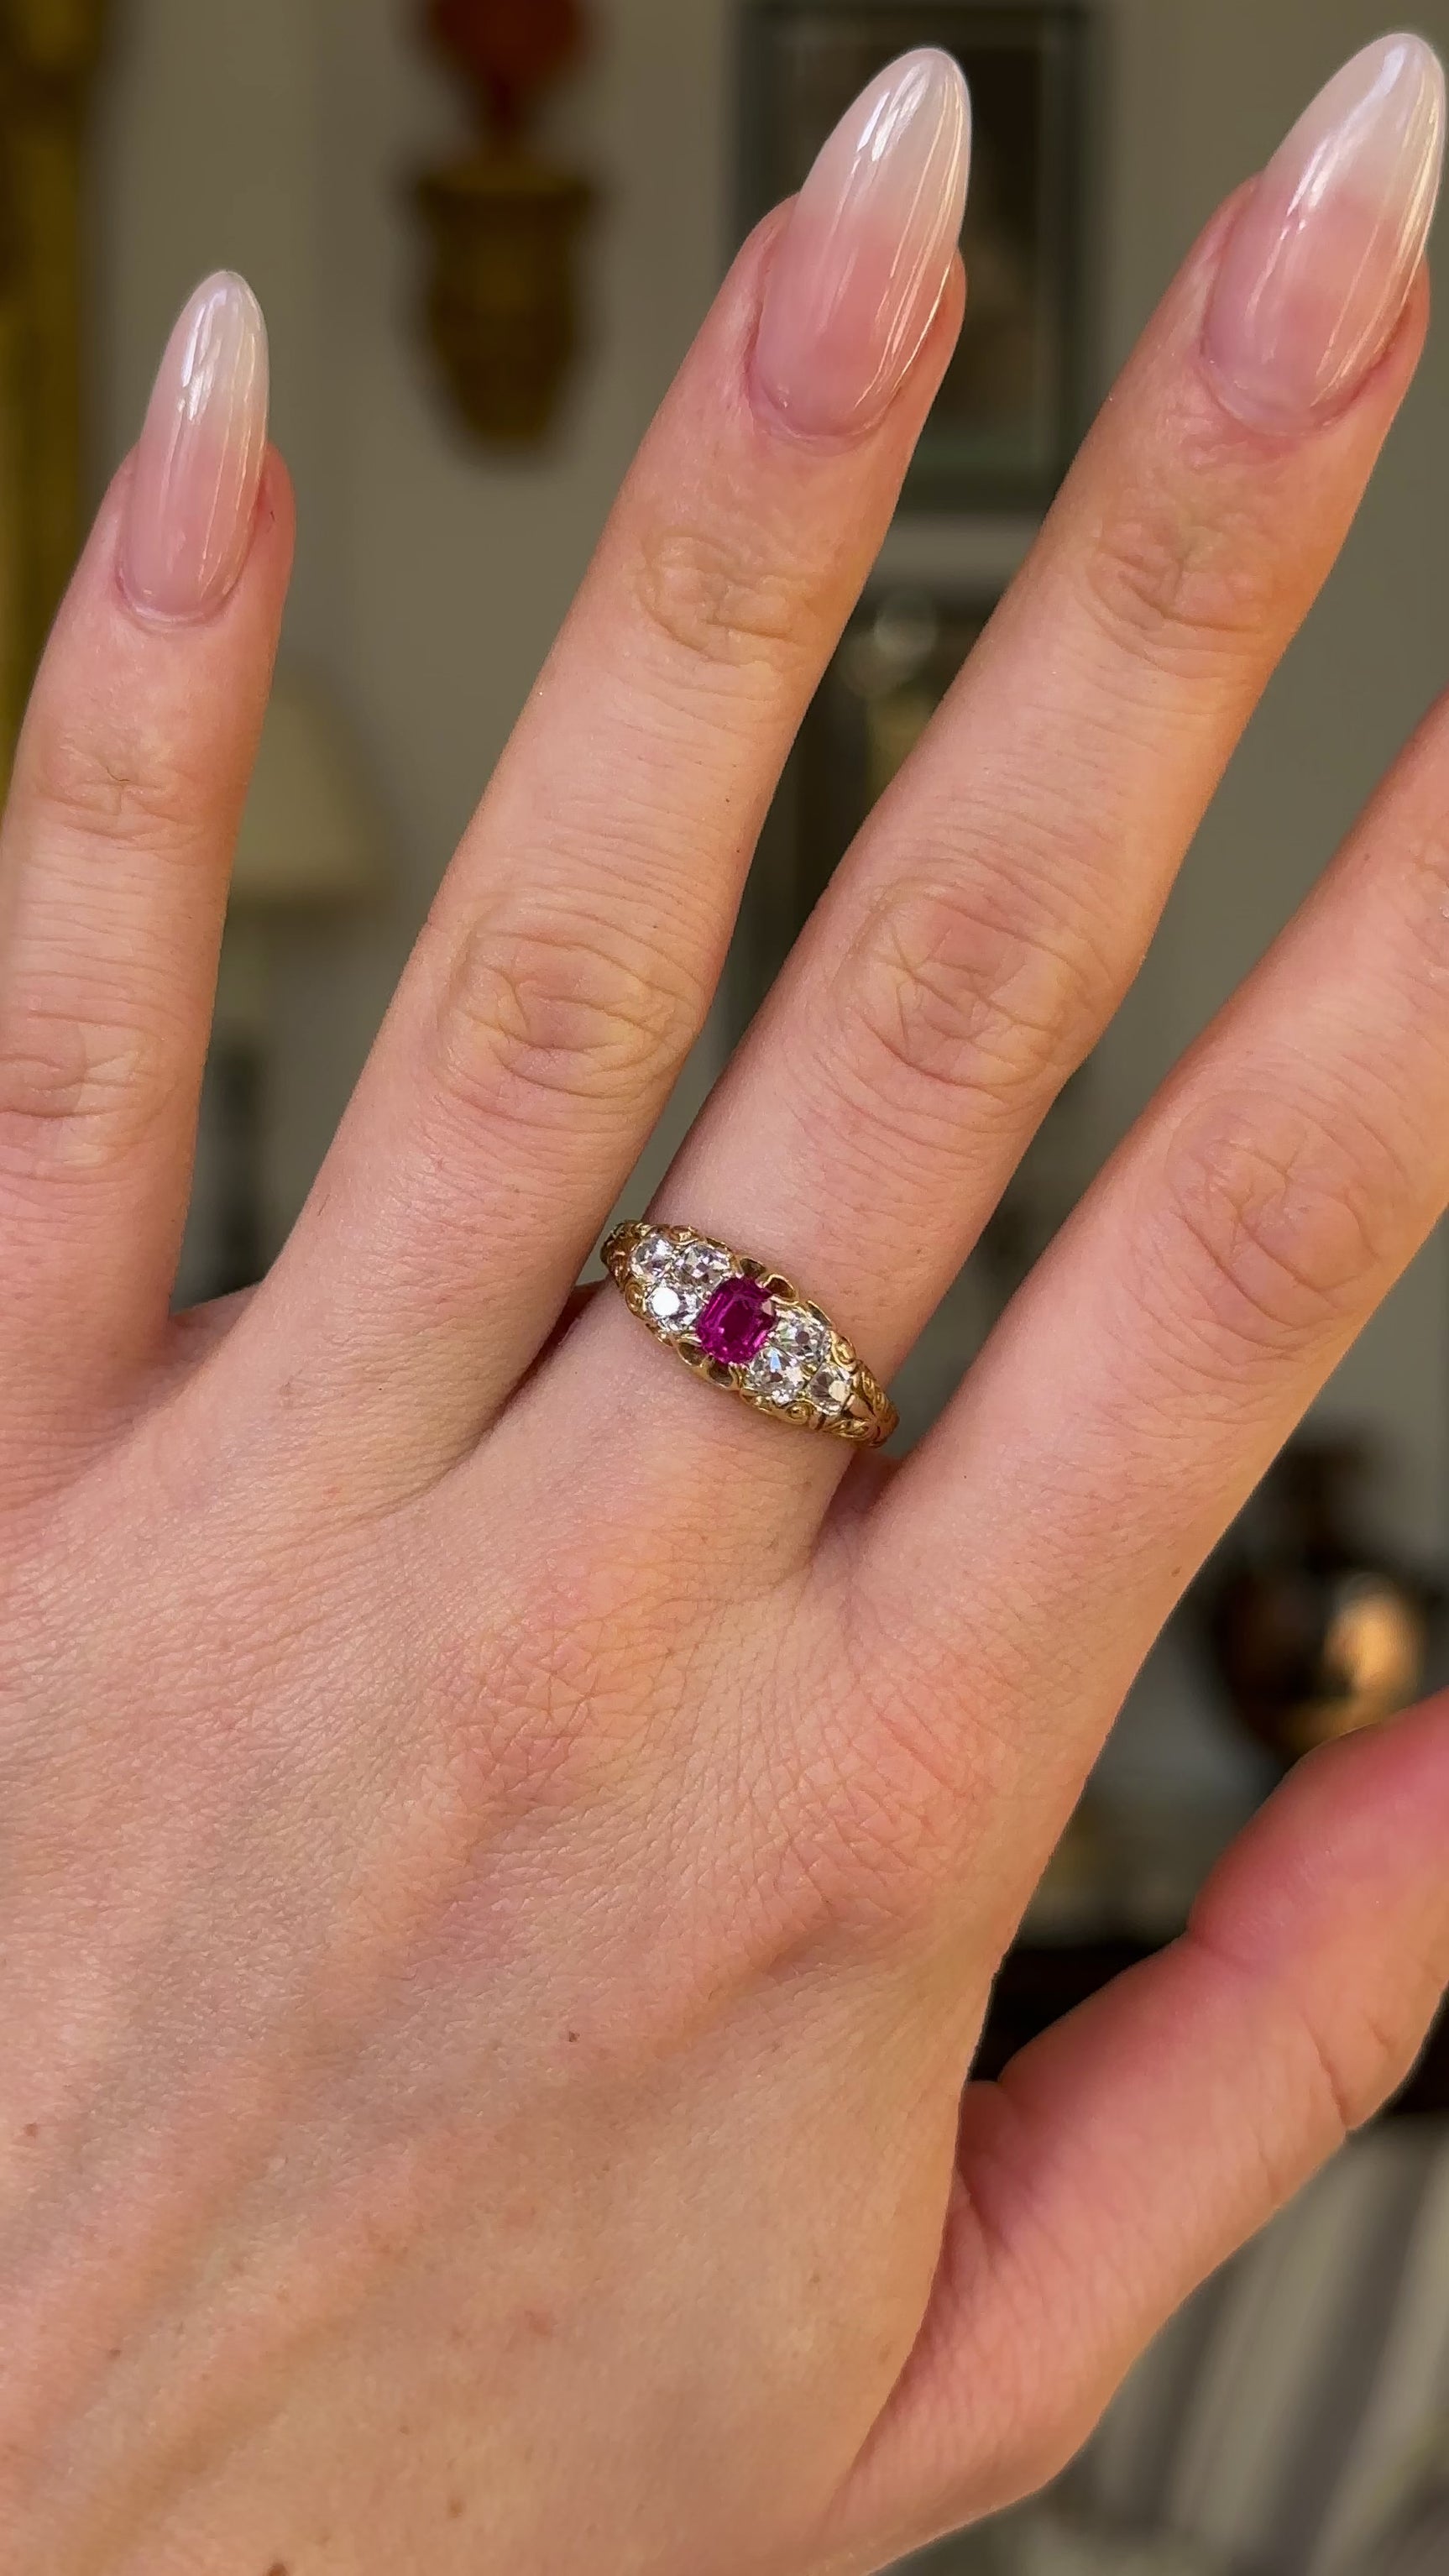 Antique, Victorian Burmese Ruby and Diamond Engagement Ring, 18ct Yellow Gold worn on hand and rotated to give perspective.